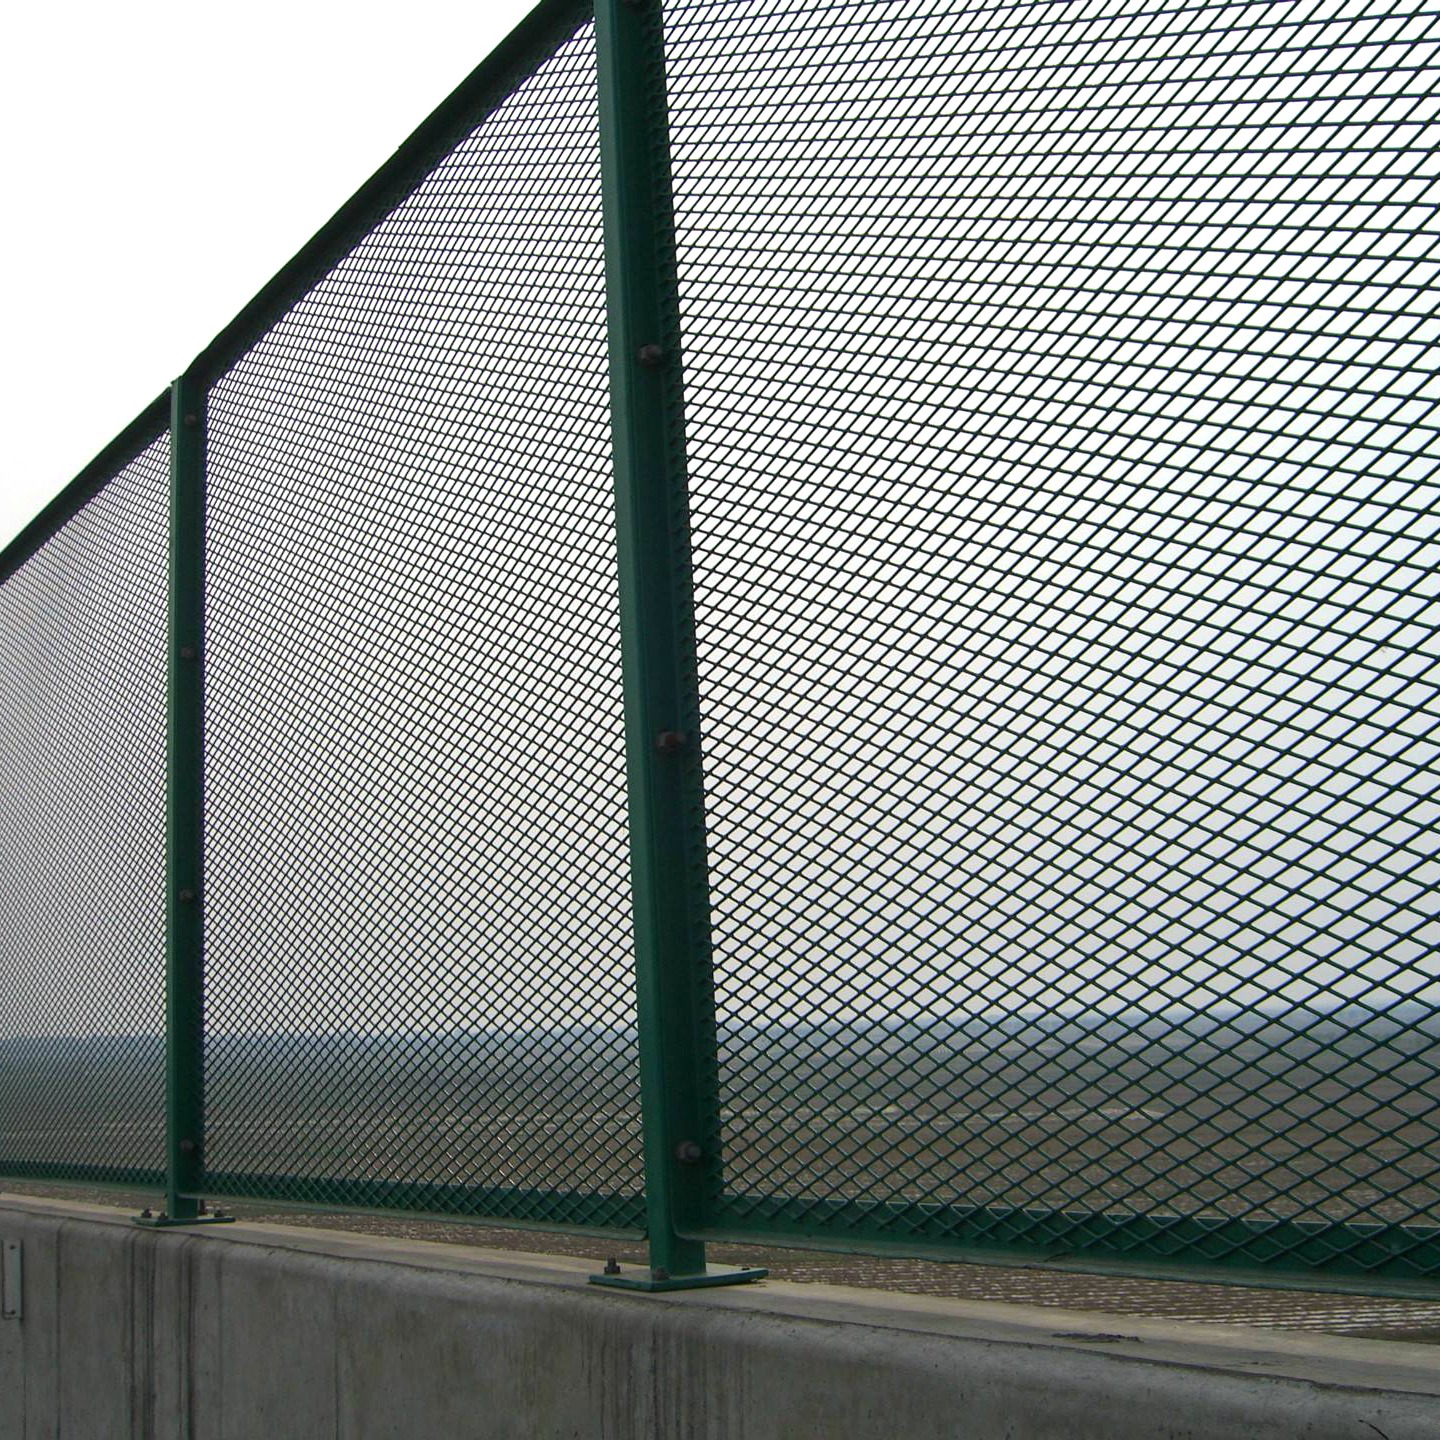 The first choice for highways – anti-glare fence